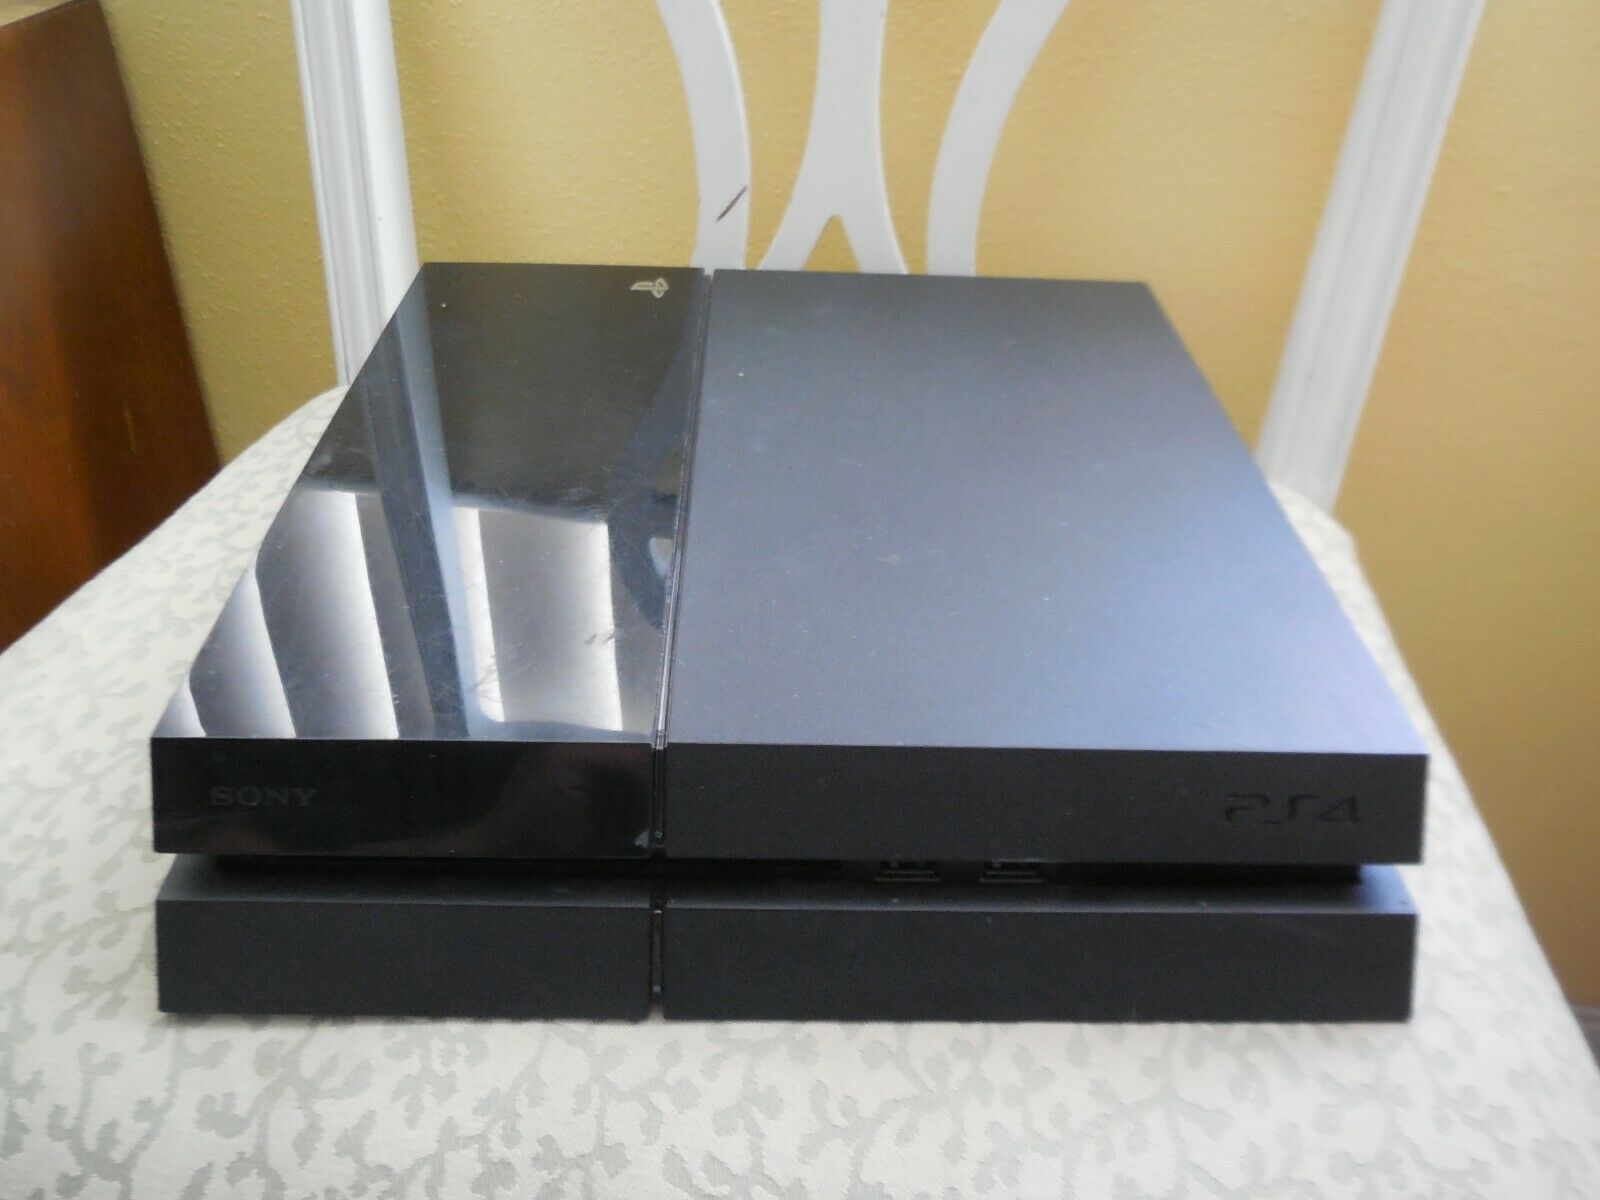 Ps4 PS4 500GB Black -CONSOLE ONLY- iCommerce on Web